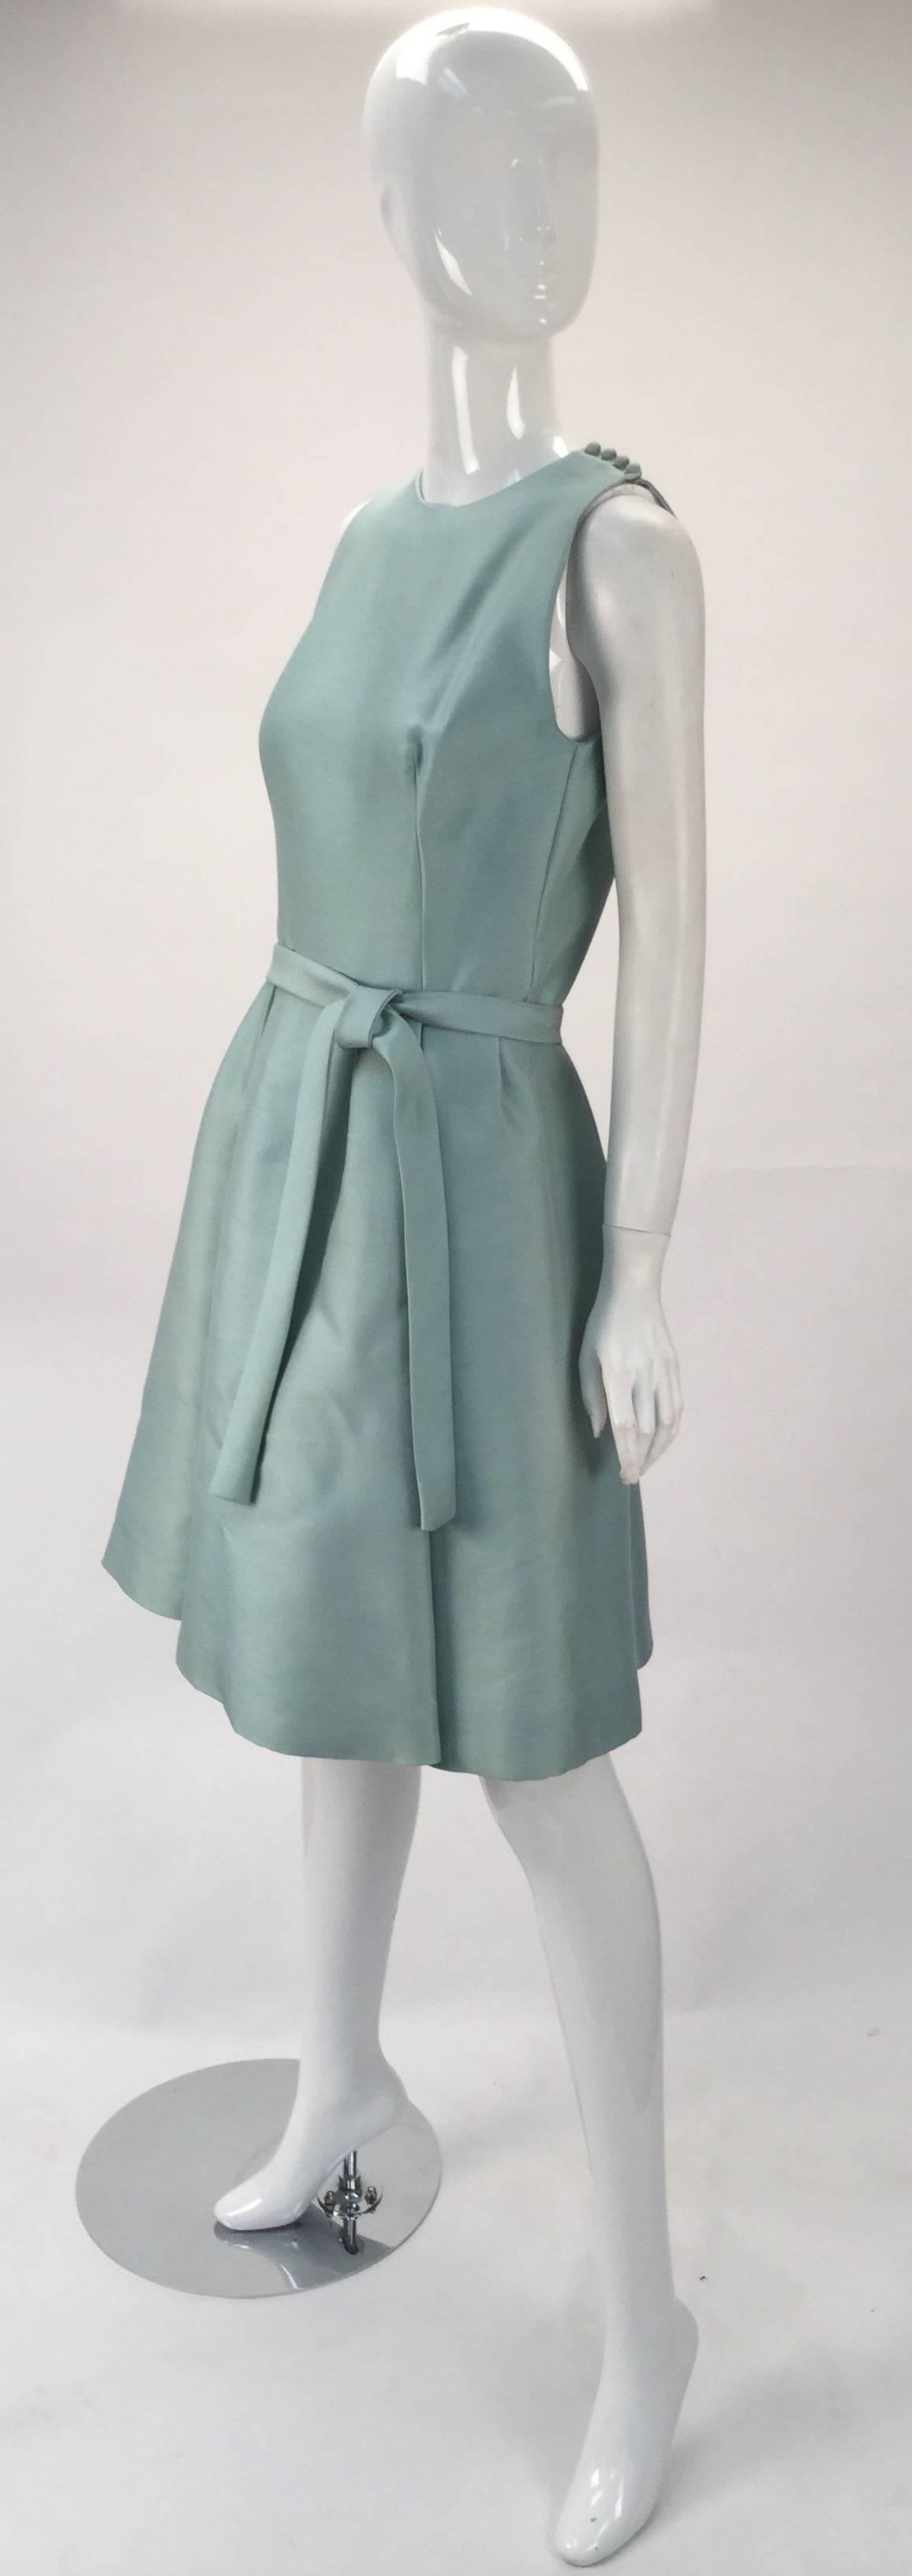 Adorable and beautiful 1960's silk seafoam green sleeveless midi dress by Geoffrey Beene. Cocktail or day wear.  Silk fabric is interlined. Self fabric belt for tying at the waist. Box pleated skirt. Bust darts. The shoulder seams have fabric